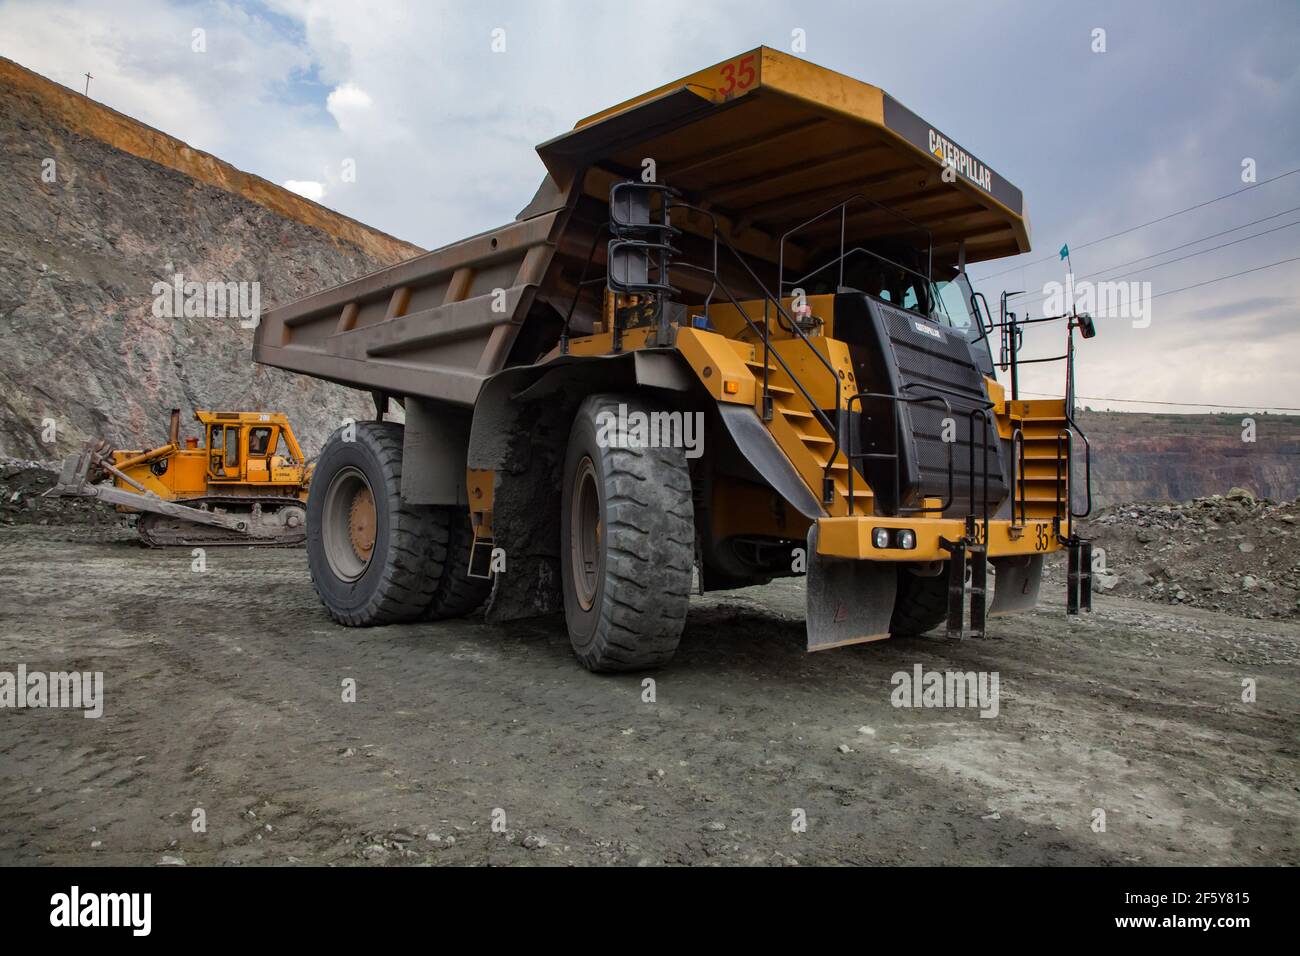 Rudny/Kazakhstan - May 14 2012:  Open-pit mining iron ore in quarry. Caterpillar quarry truck transporting ore to concentrating plant. Stock Photo